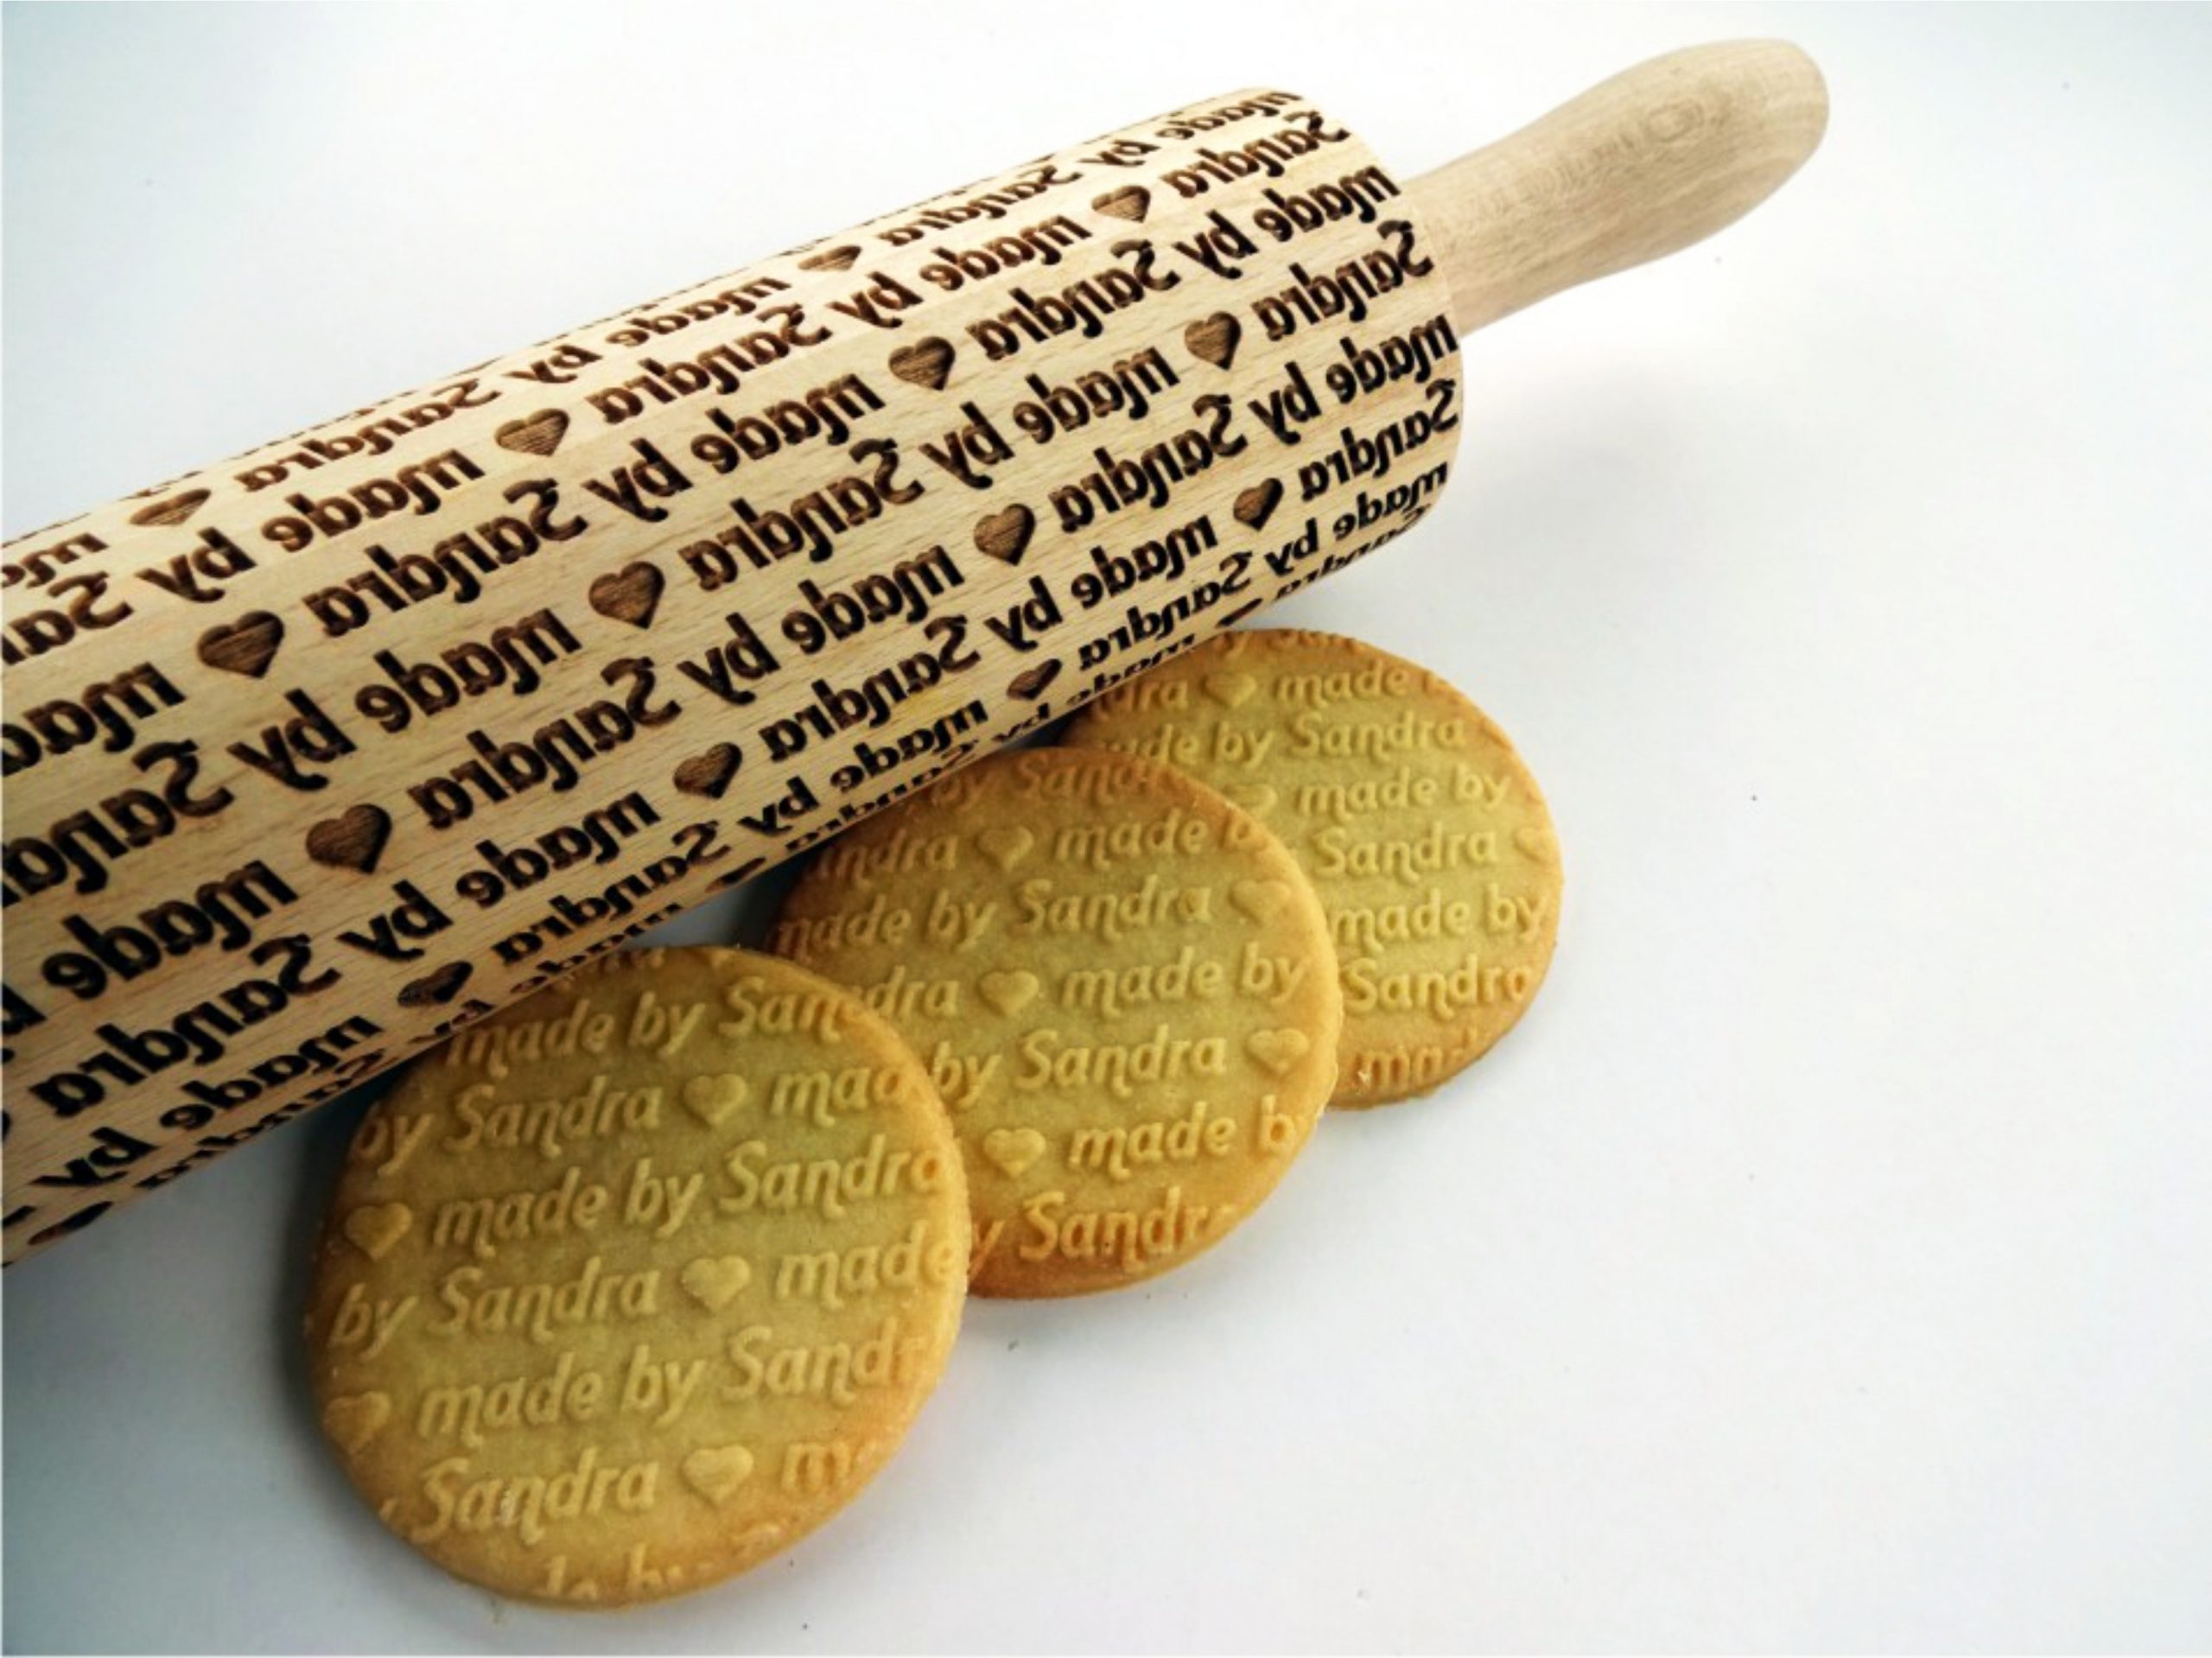 Personalized Rolling Pin - made by ....